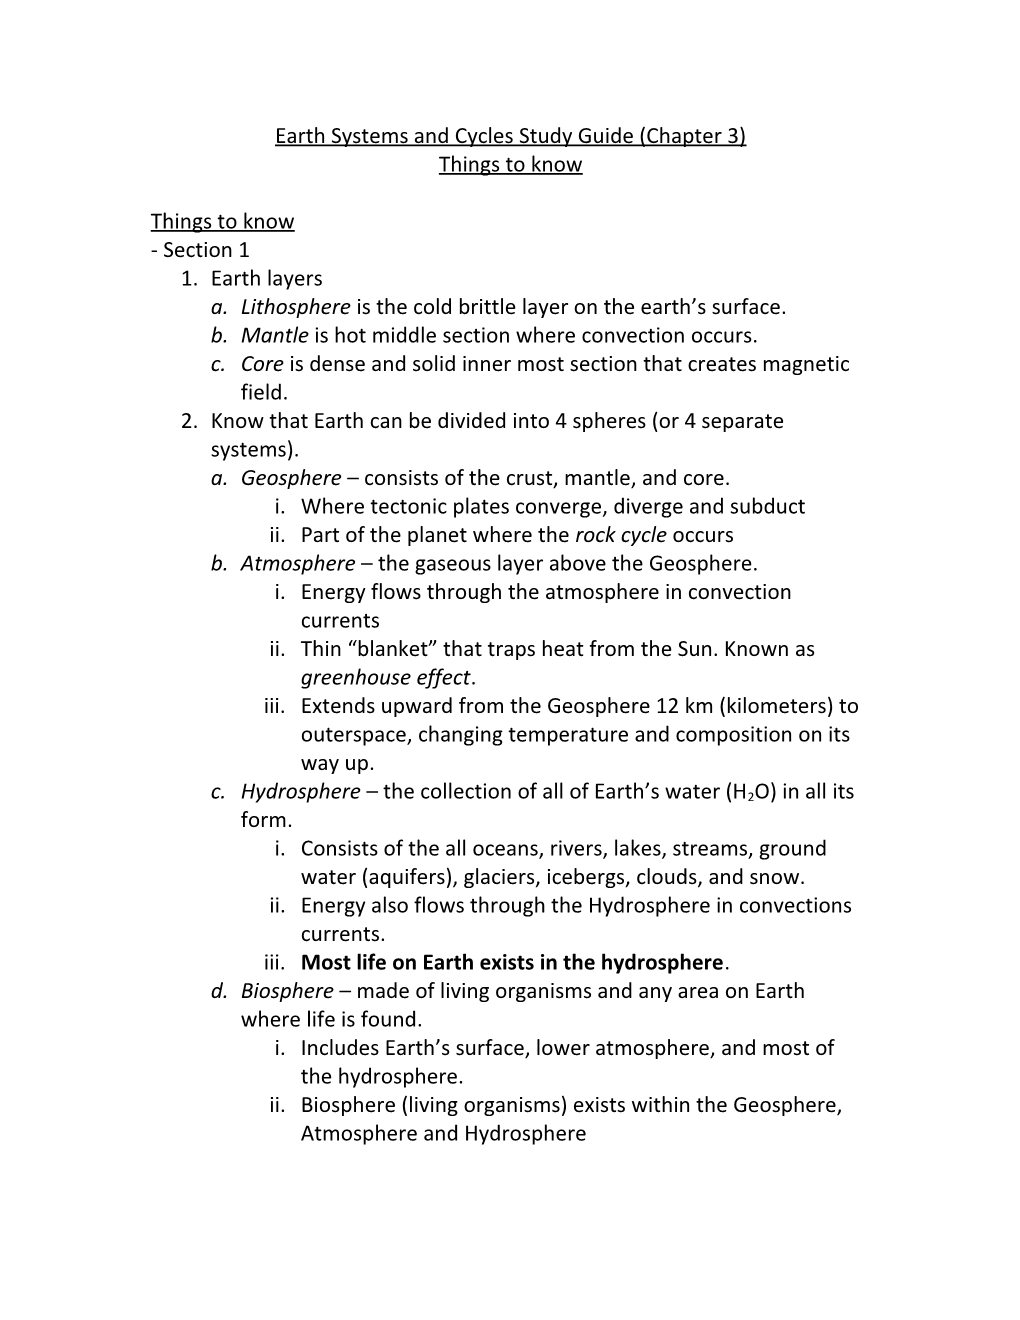 Earth Systems and Cycles Test (Chapter 3)